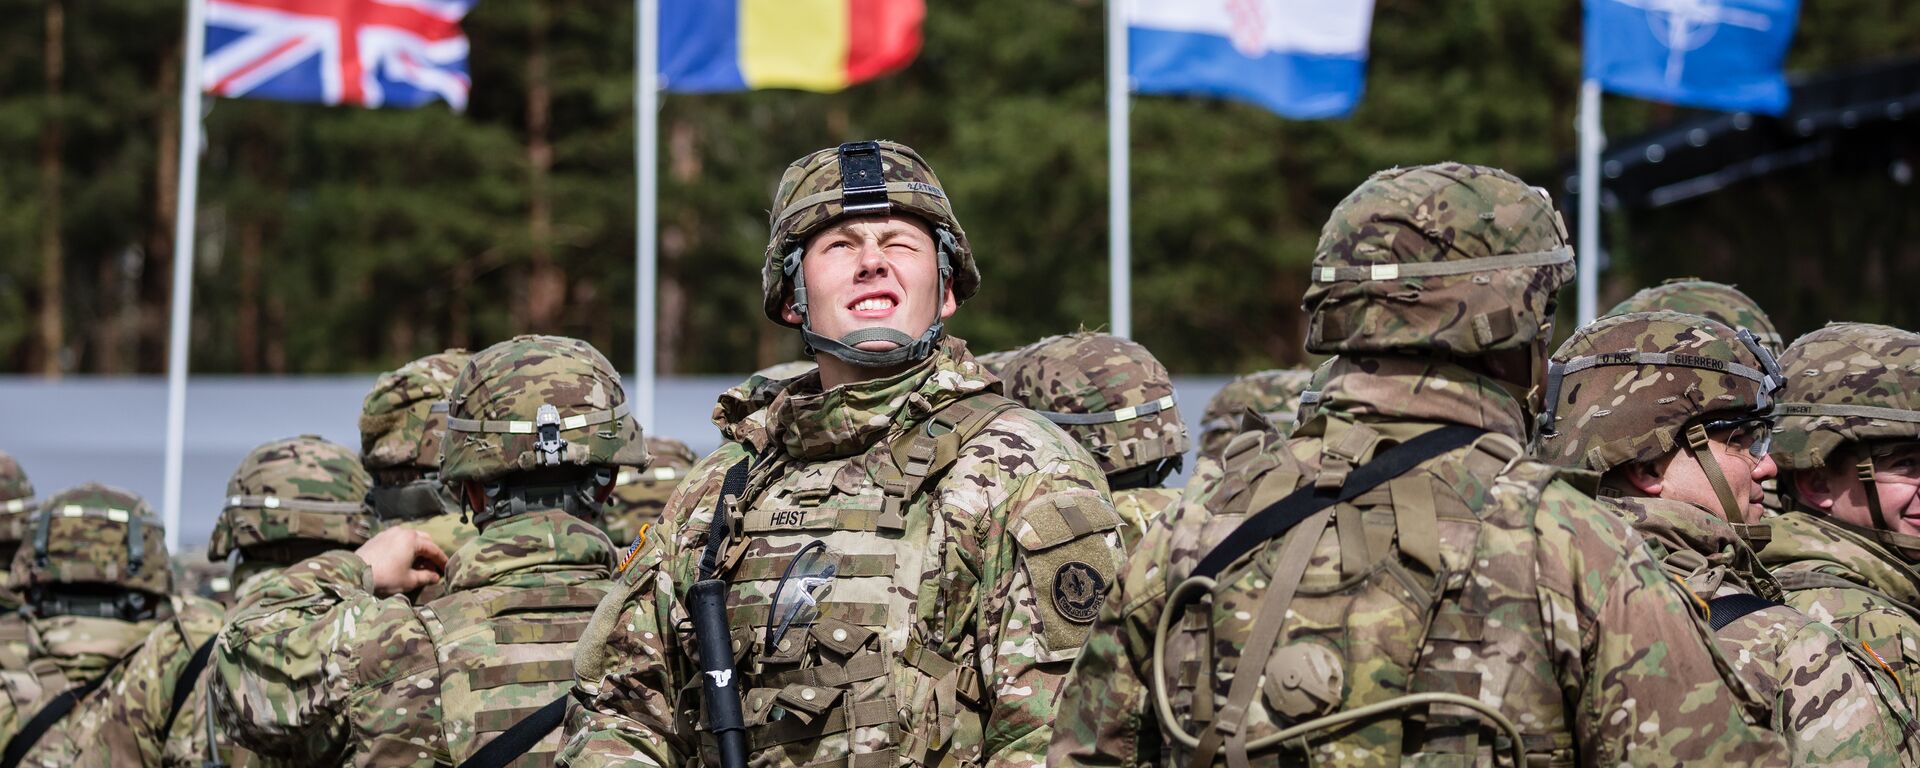 US soldiers are pictured prior the beginning of the official welcoming ceremony of NATO troops in Orzysz, Poland, on April 13, 2017. - Sputnik International, 1920, 06.10.2020